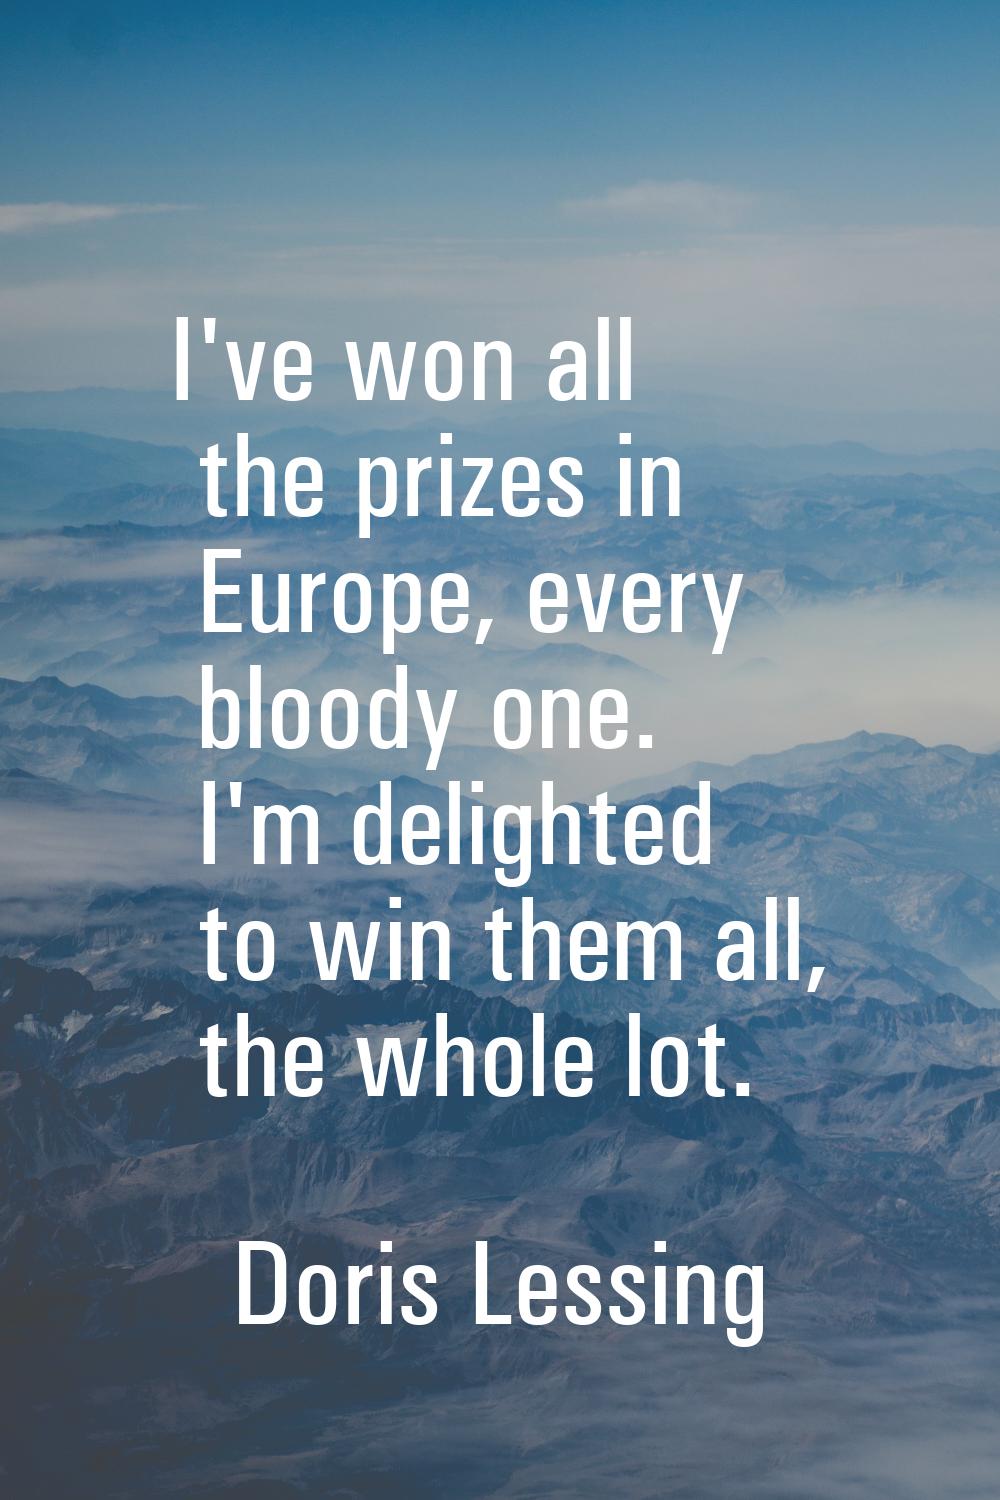 I've won all the prizes in Europe, every bloody one. I'm delighted to win them all, the whole lot.